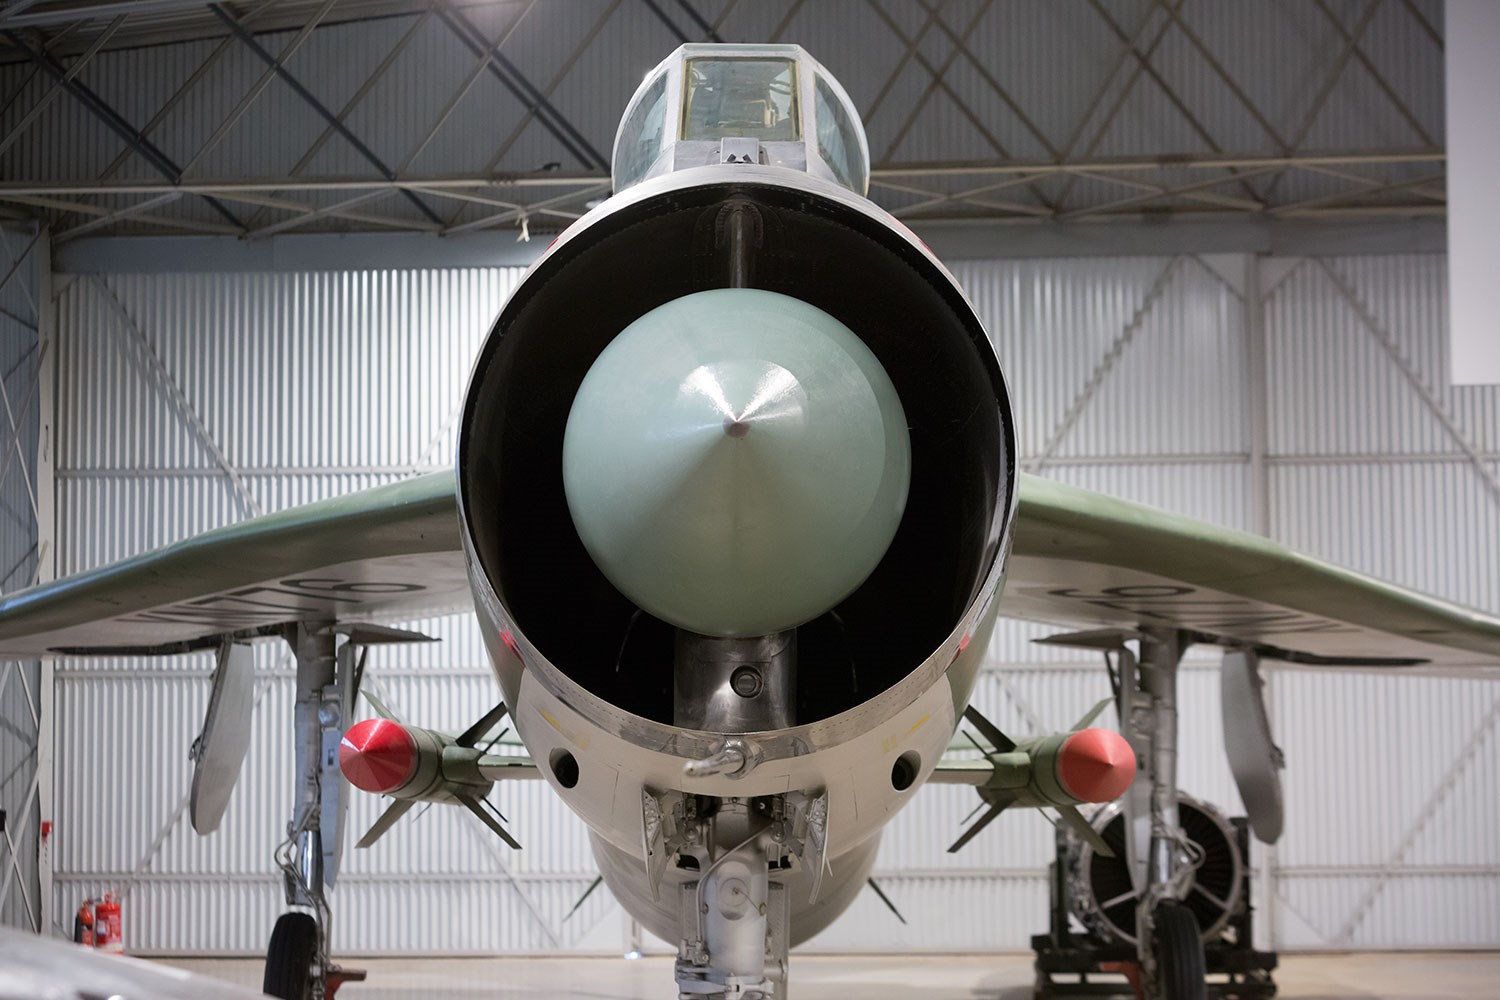 The nose of a green English Electric Lightning aircraft with a missile on either side.